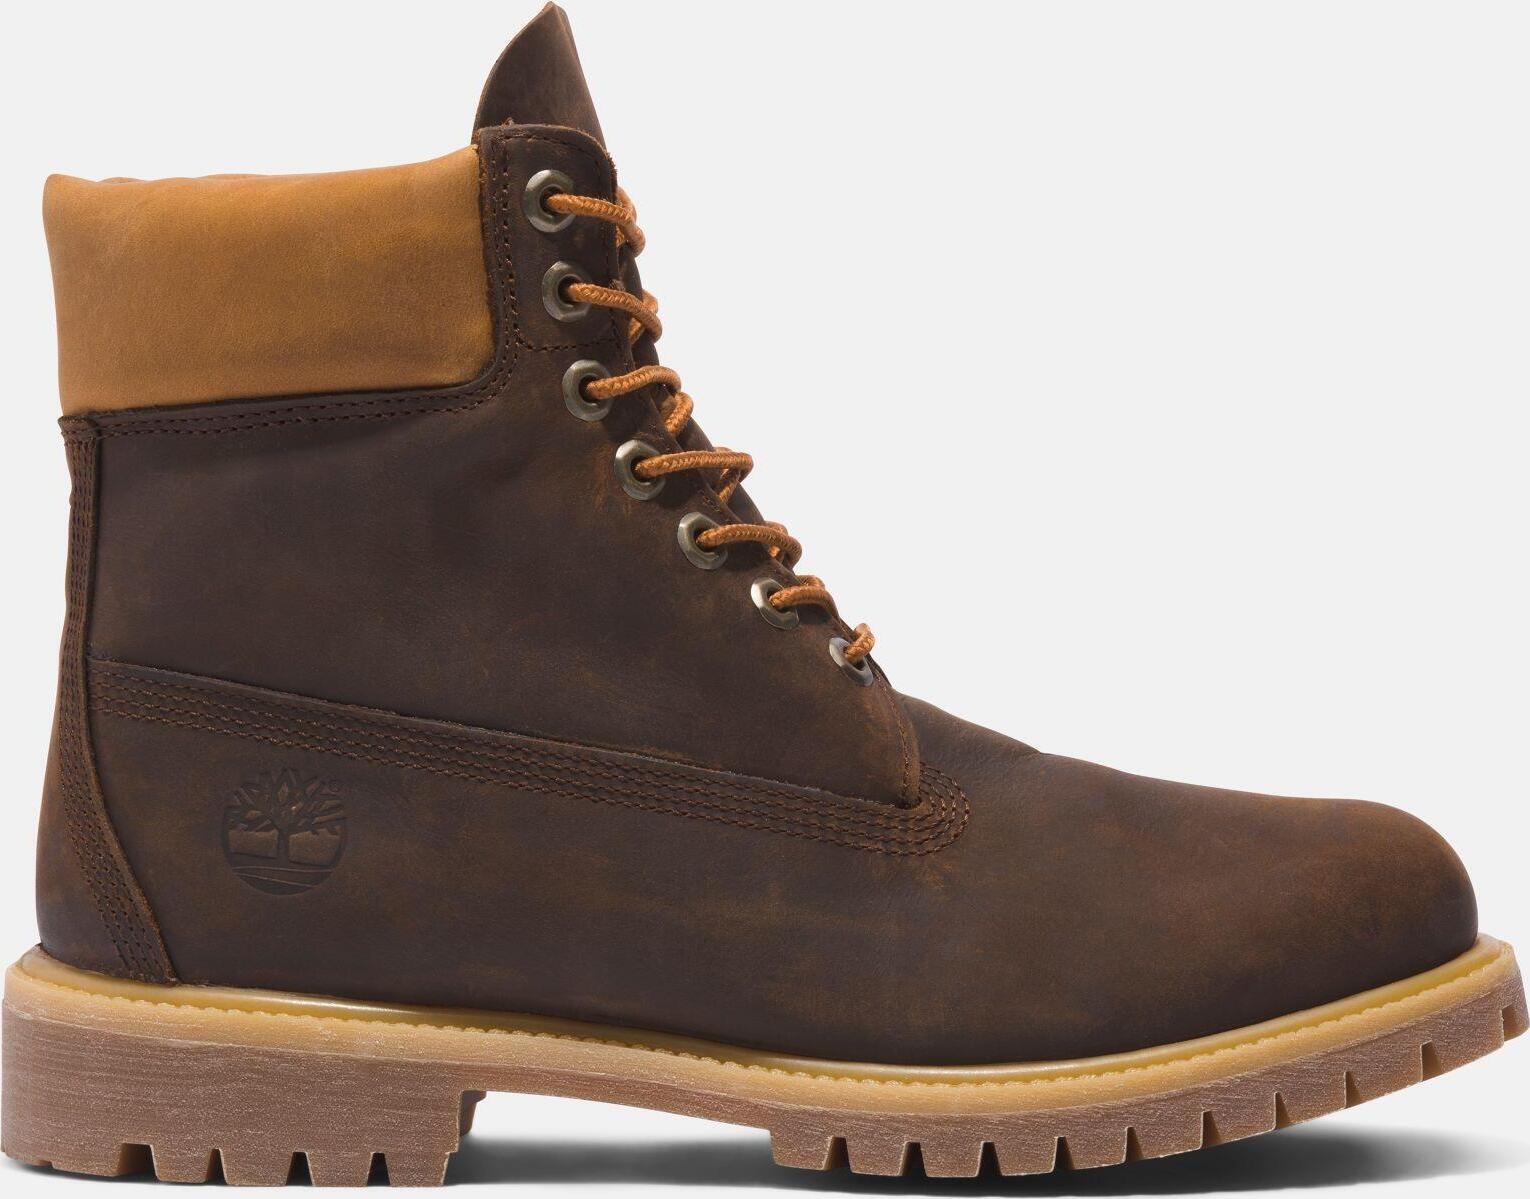 Timberland Mens 6 Inch Premium Boot cathay spice 9 Wide Fit